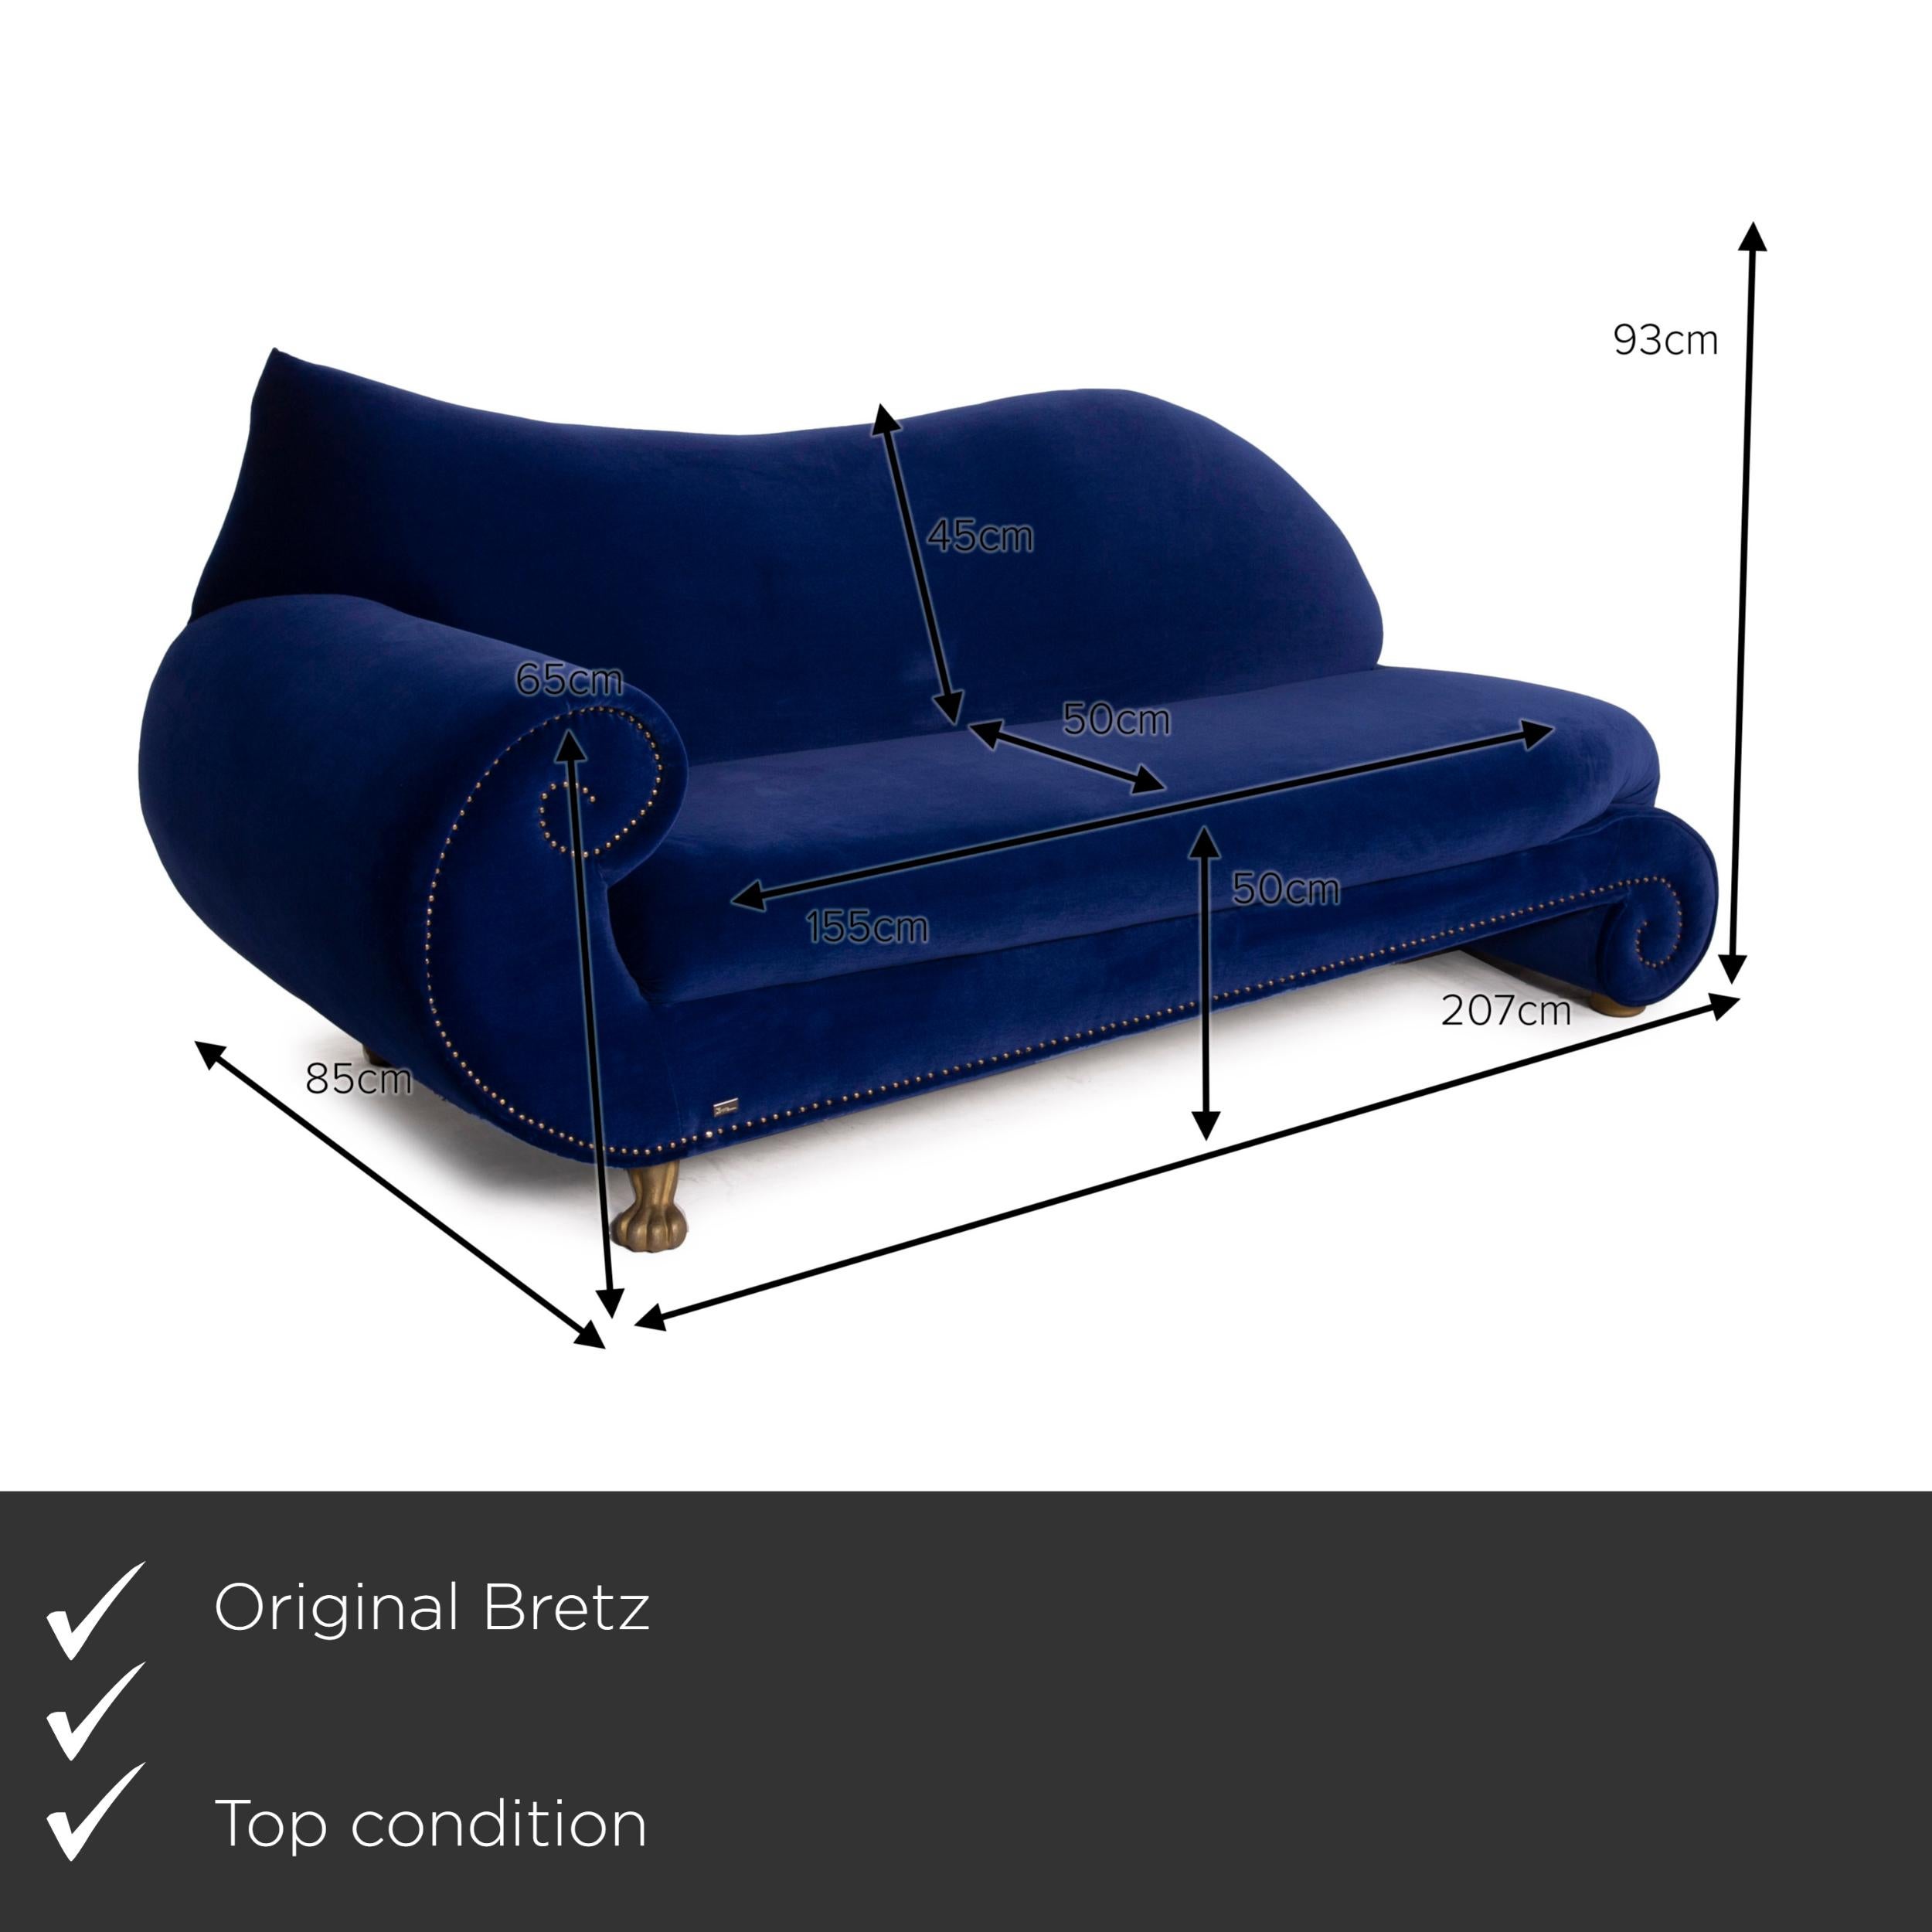 We present to you a Bretz Gaudi fabric sofa blue velvet.
 SKU: #11750-c3
 

 Product measurements in centimeters:
 

 depth: 85
 width: 207
 height: 93
 seat height: 50
 rest height: 65
 seat depth: 50
 seat width: 155
 back height: 45